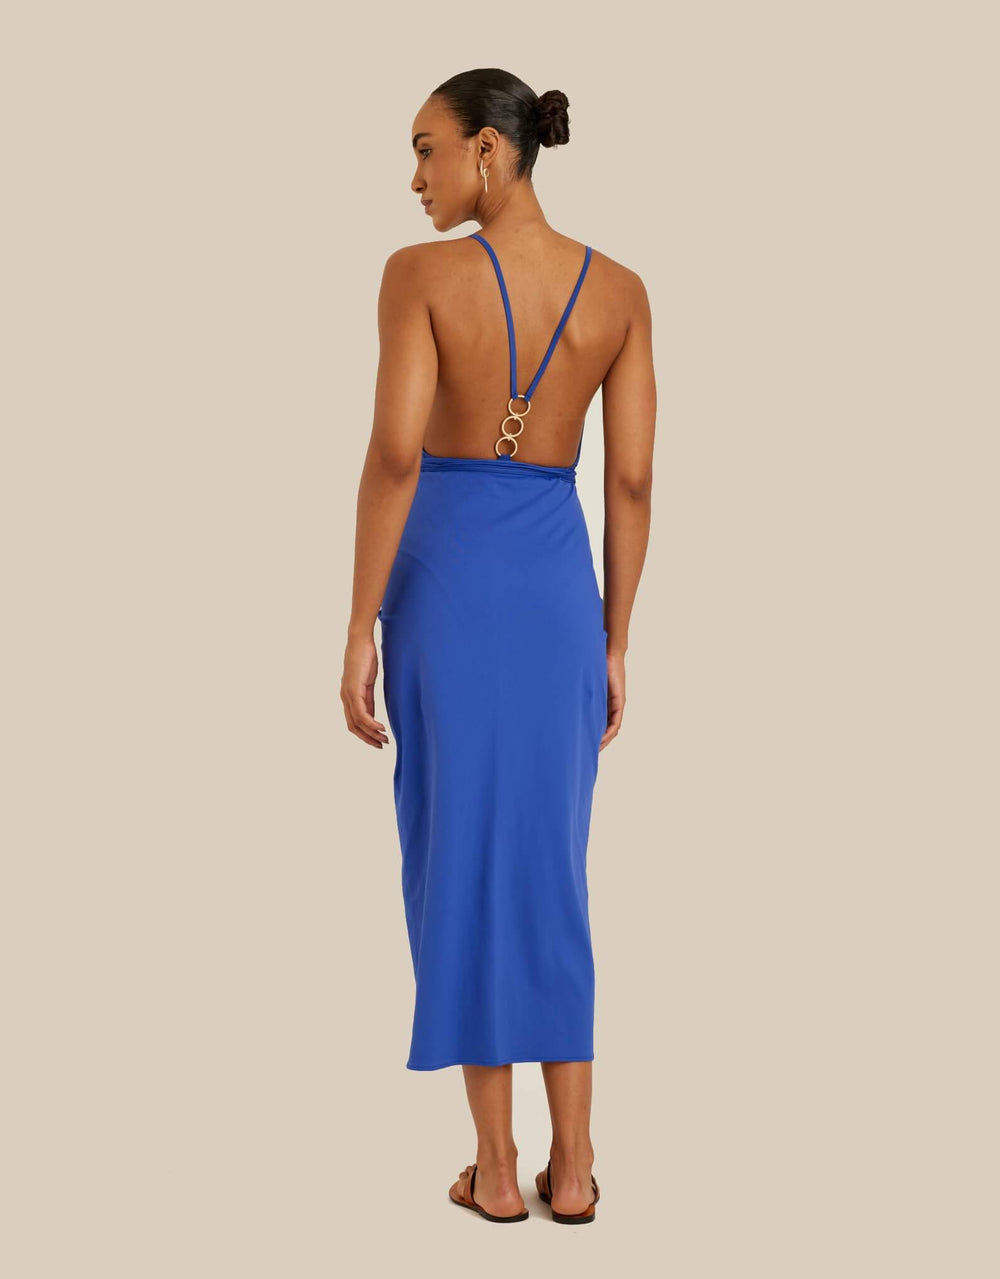 Ultramarine sarong with long ties, made from recycled Lycra by Lenny Niemeyer.